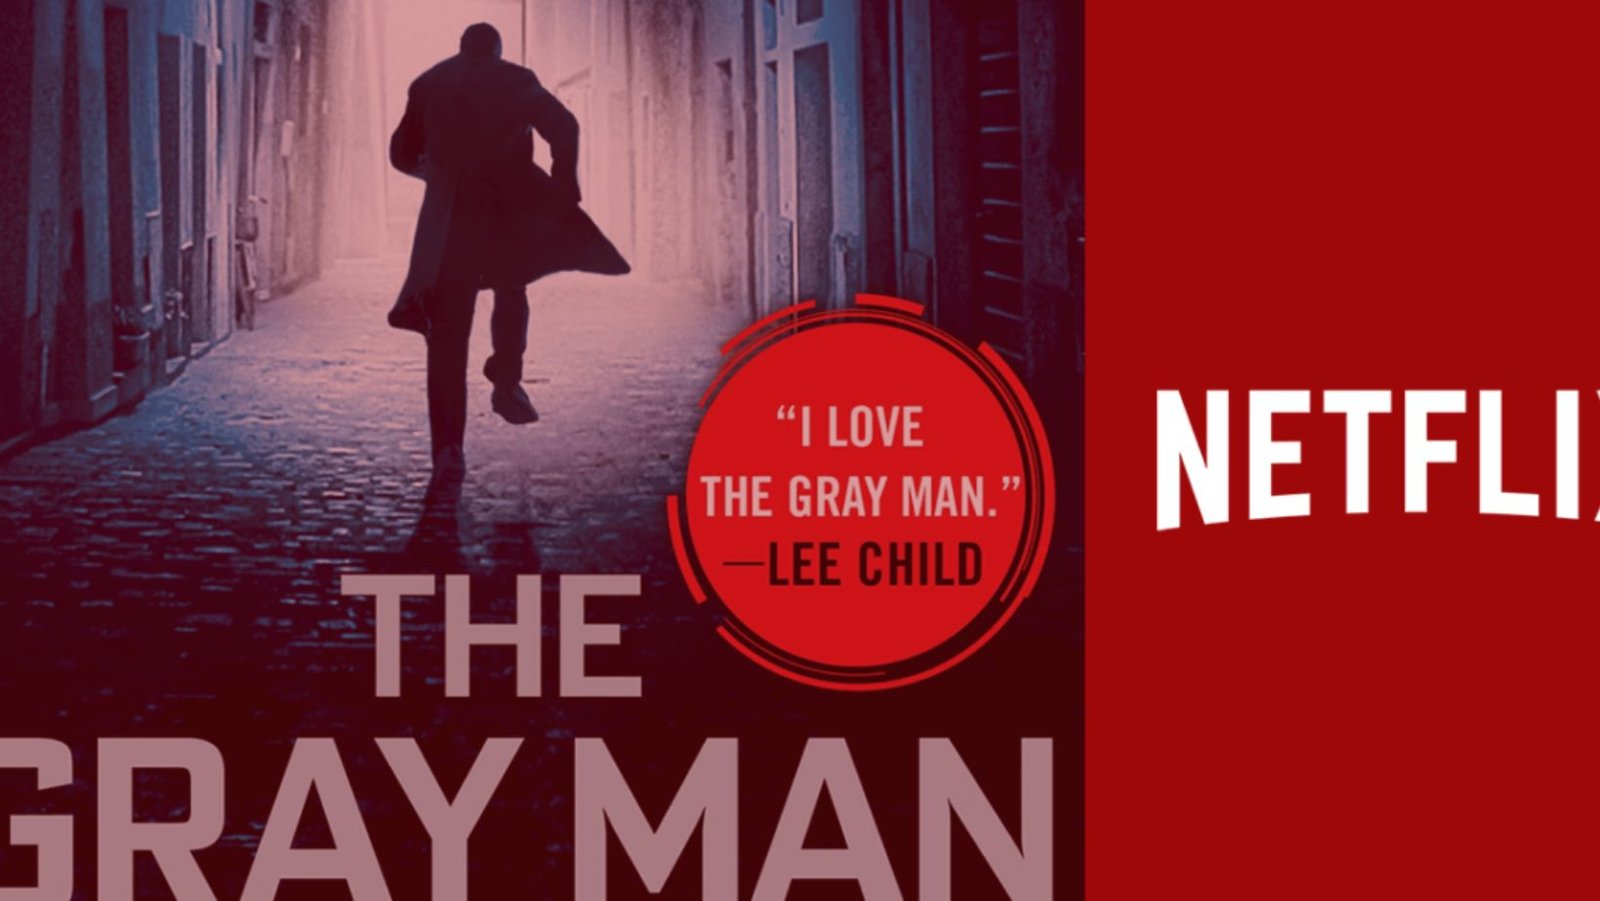 Netflix is creating a sequel to "The Gray Man"